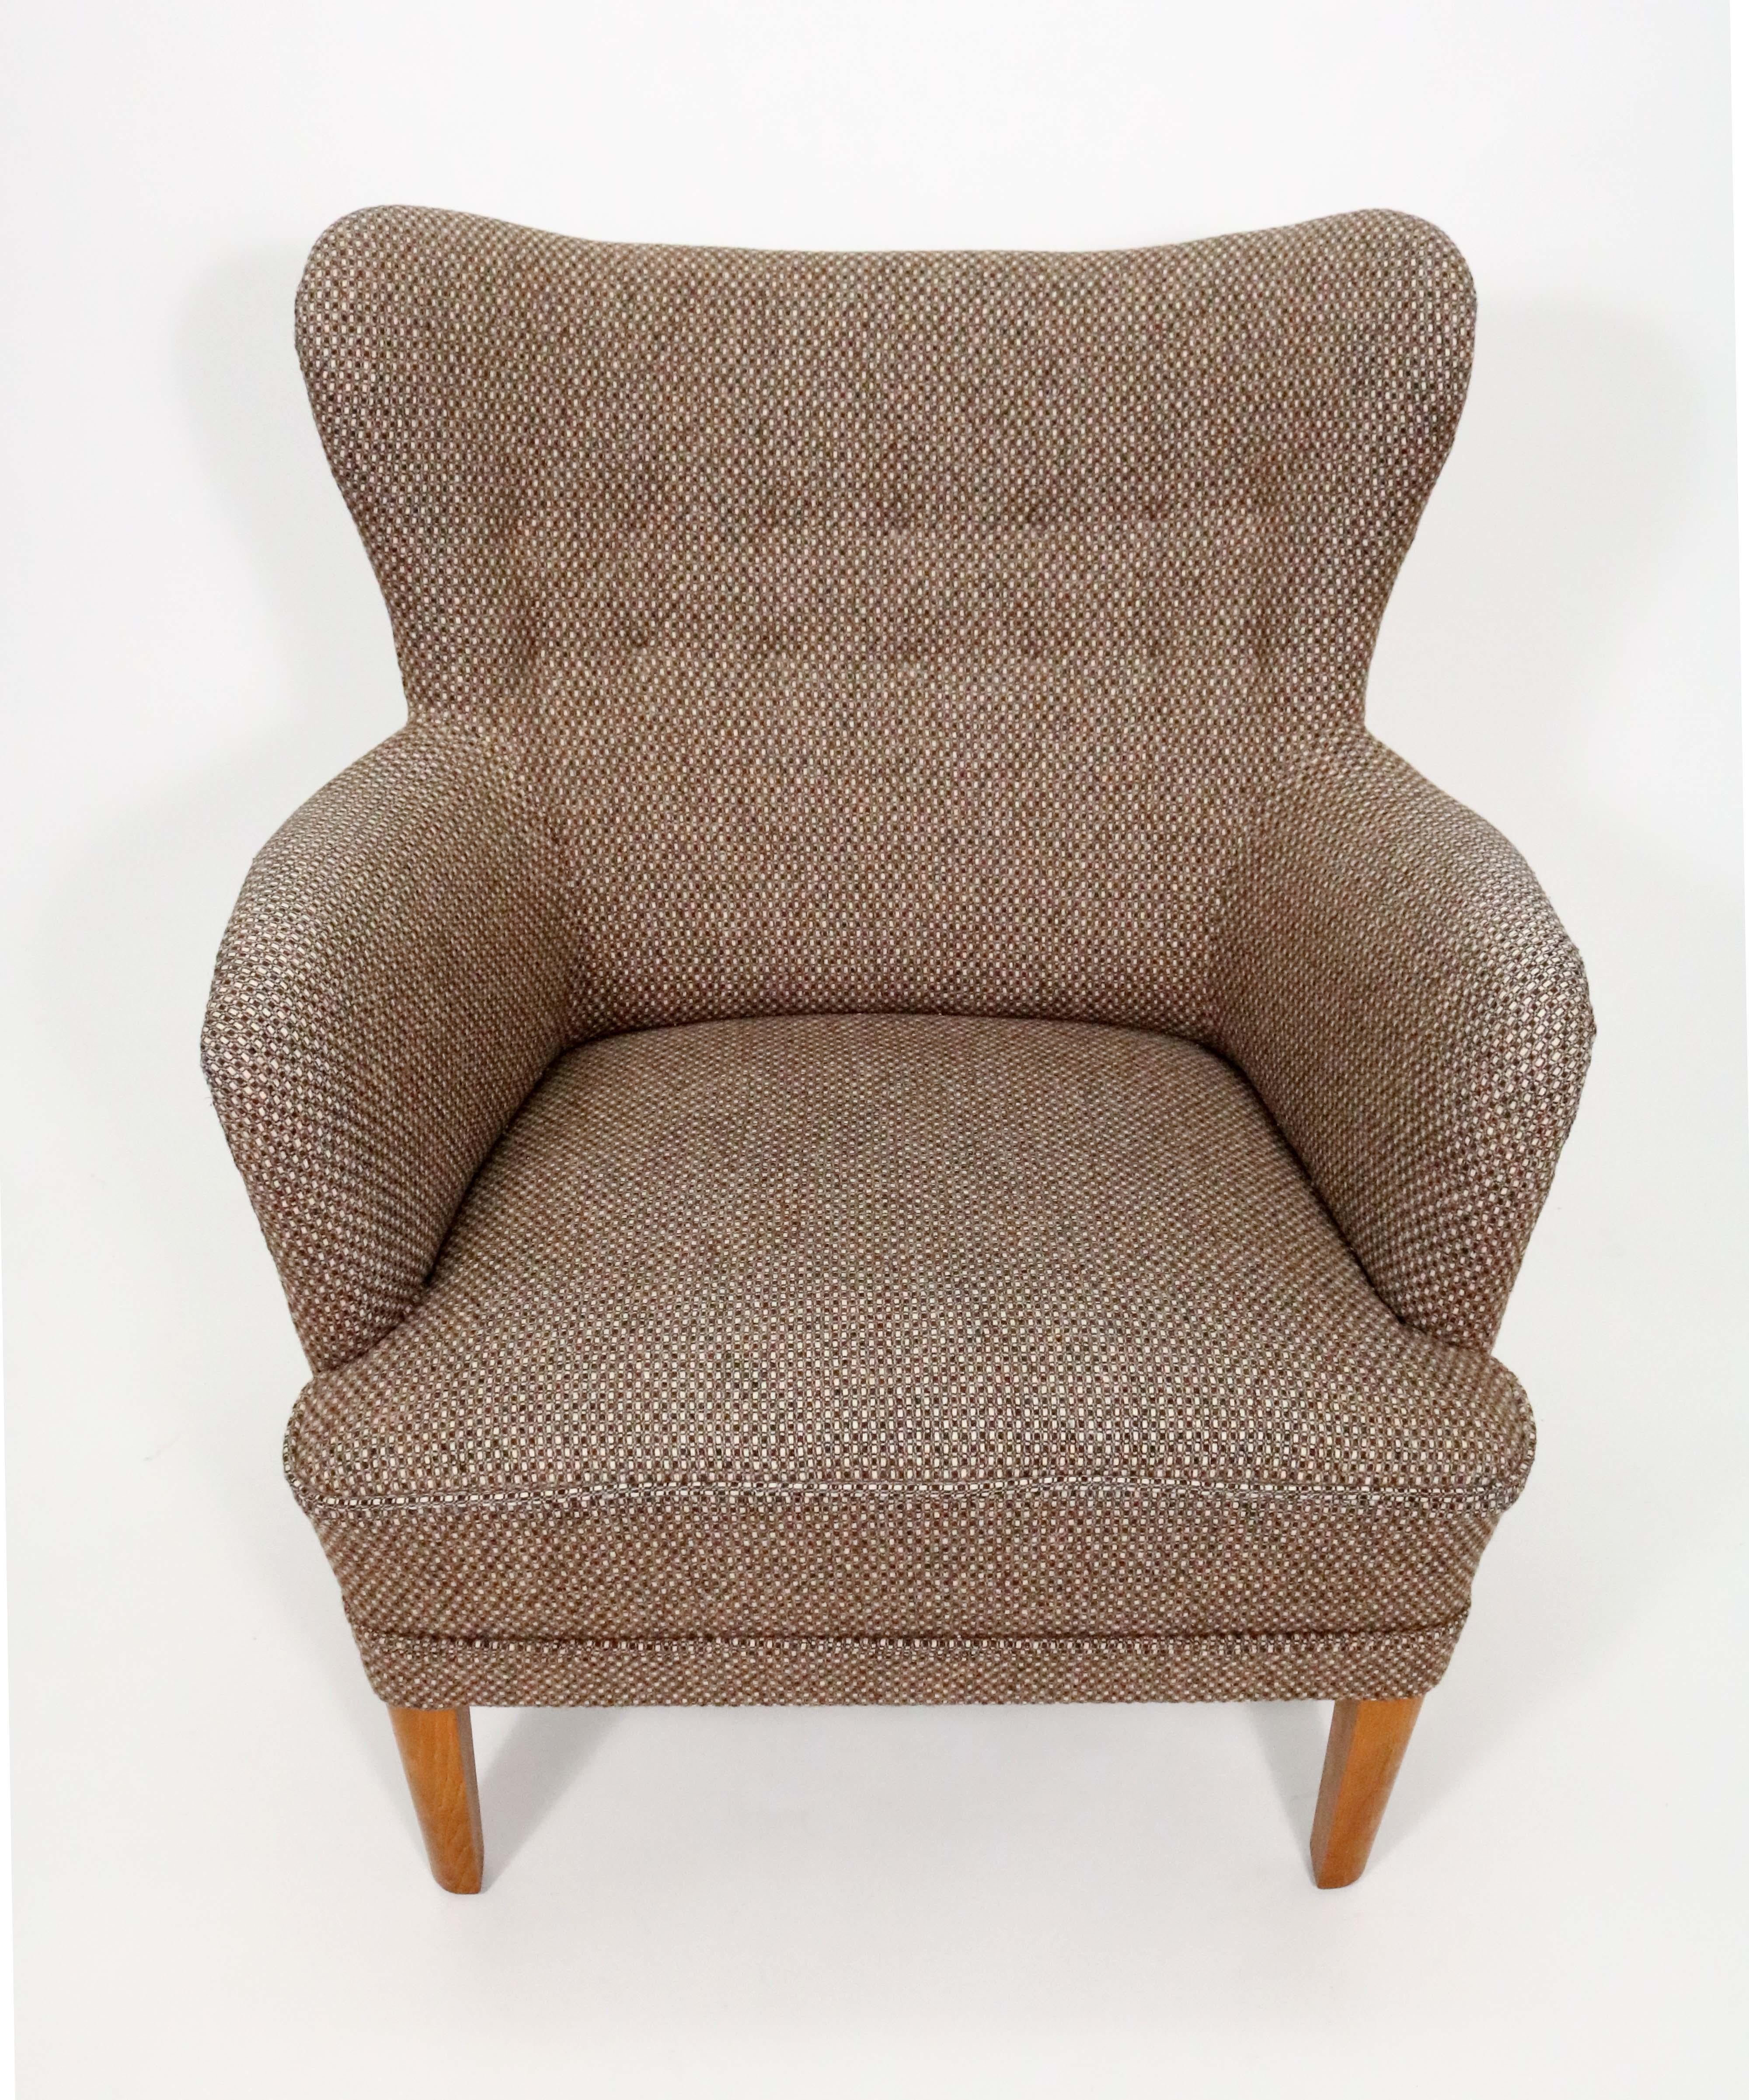 A complementary pair of chairs upholstered in a heavy tweed wool - a sophisticated barrel occasional chair and a mate in the manner of Carl Malmsten's take on the wingback chair. 

Both in excellent vintage condition.

Barrel chair dimensions: 28